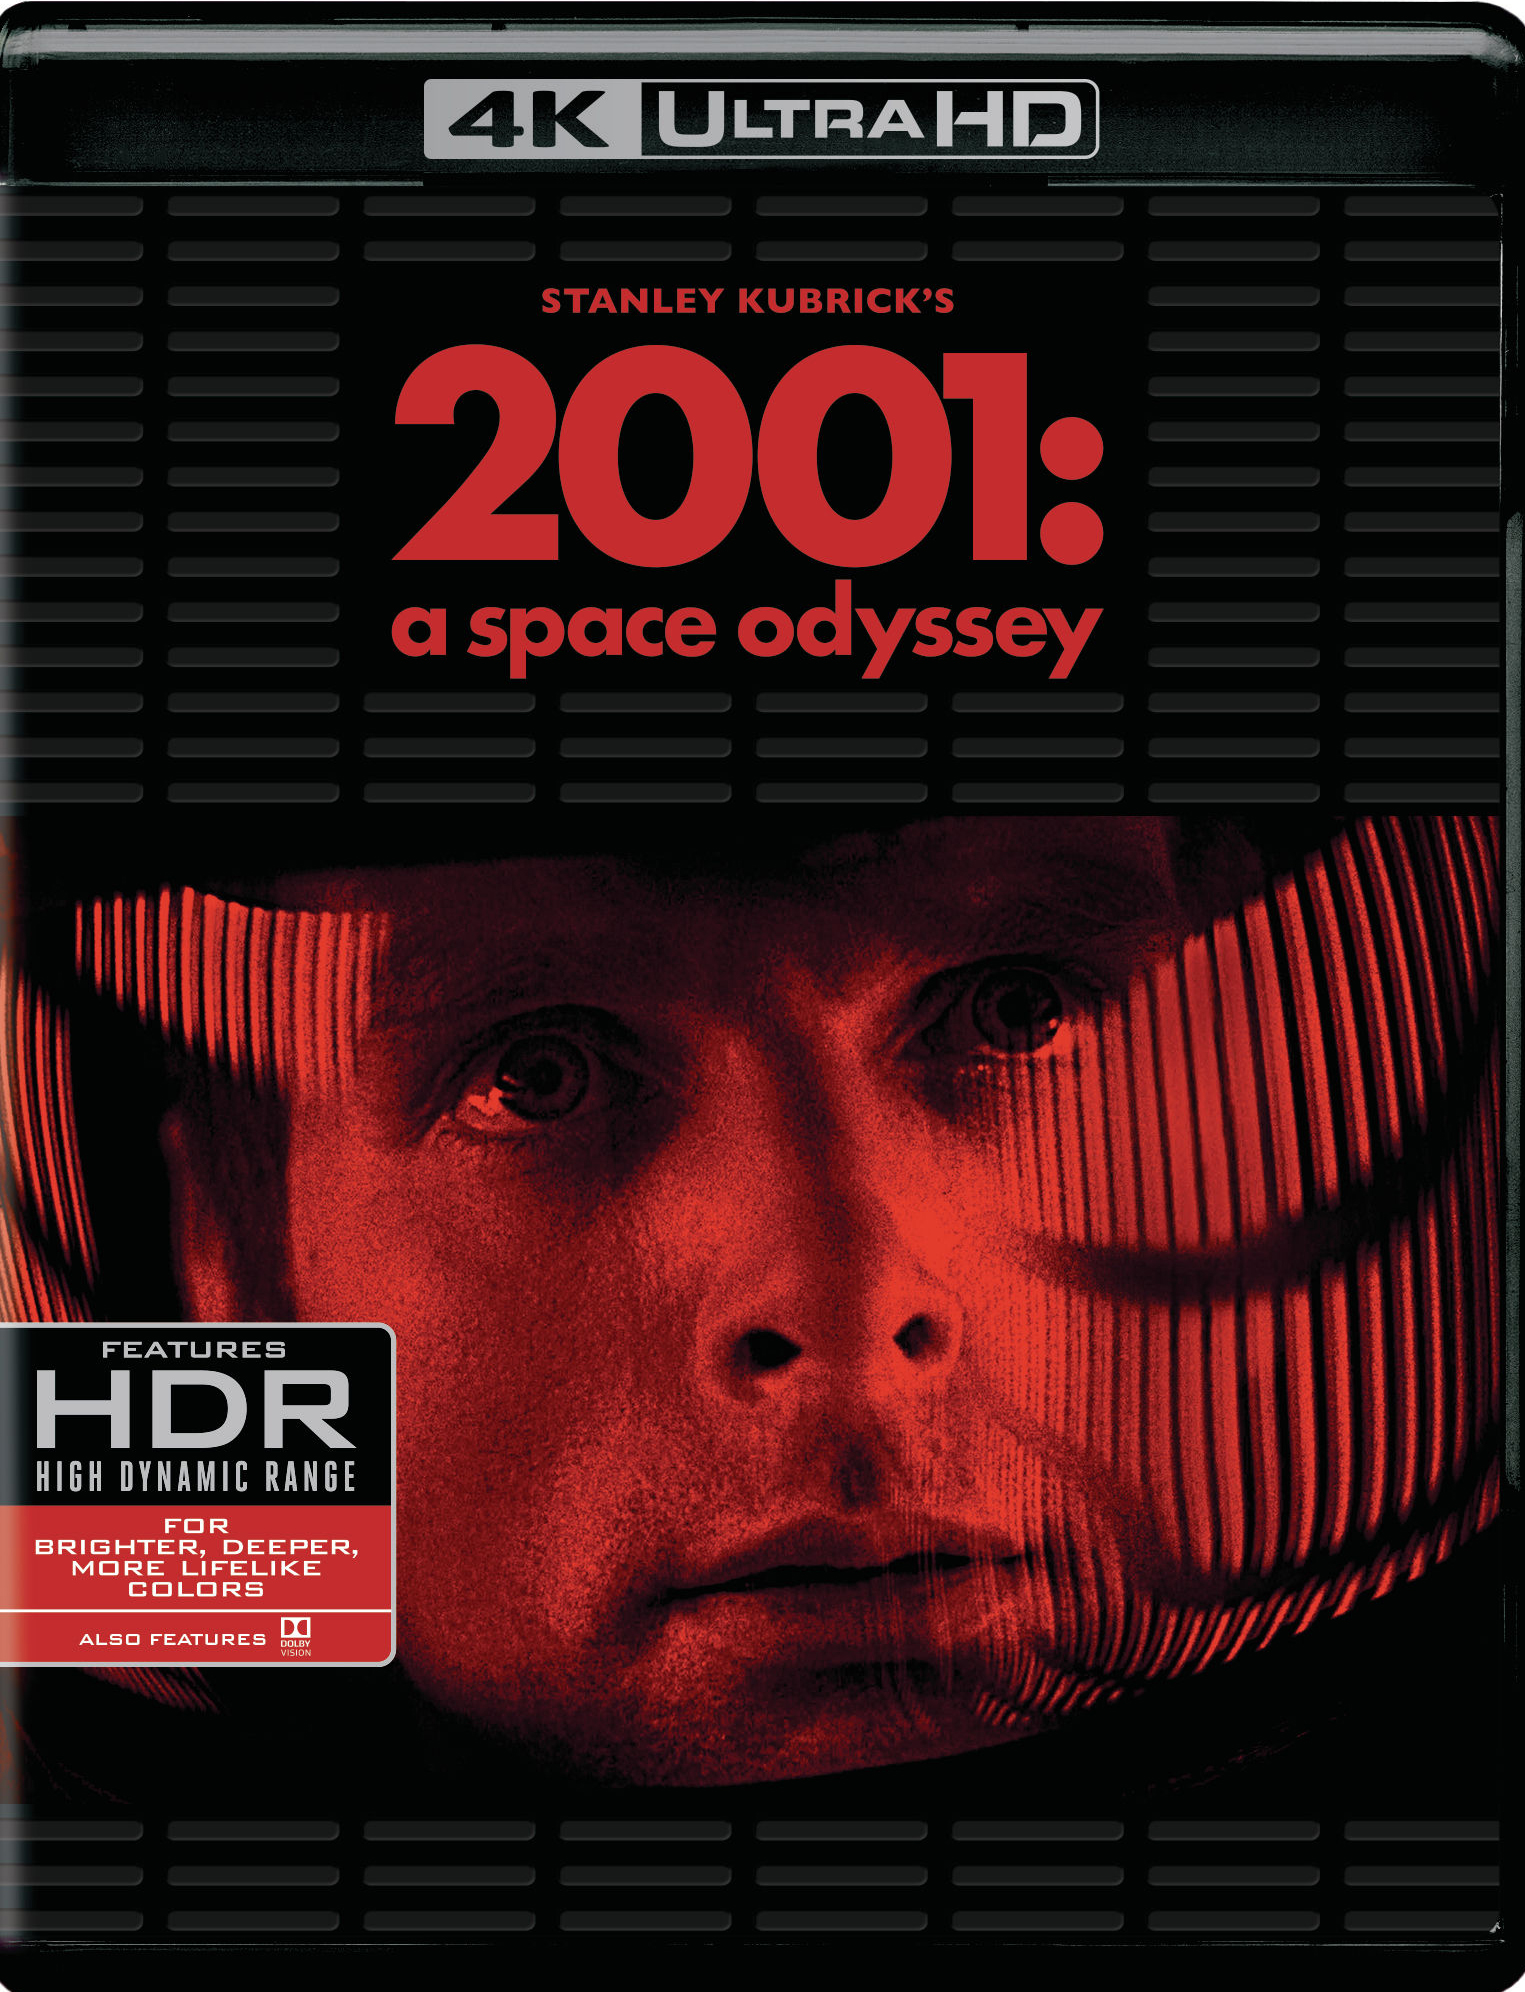 NEW HAL 9000 LENS FROM 2001 SPACE ODYSSEY MOVIE WALL ART PRINT PREMIUM POSTER